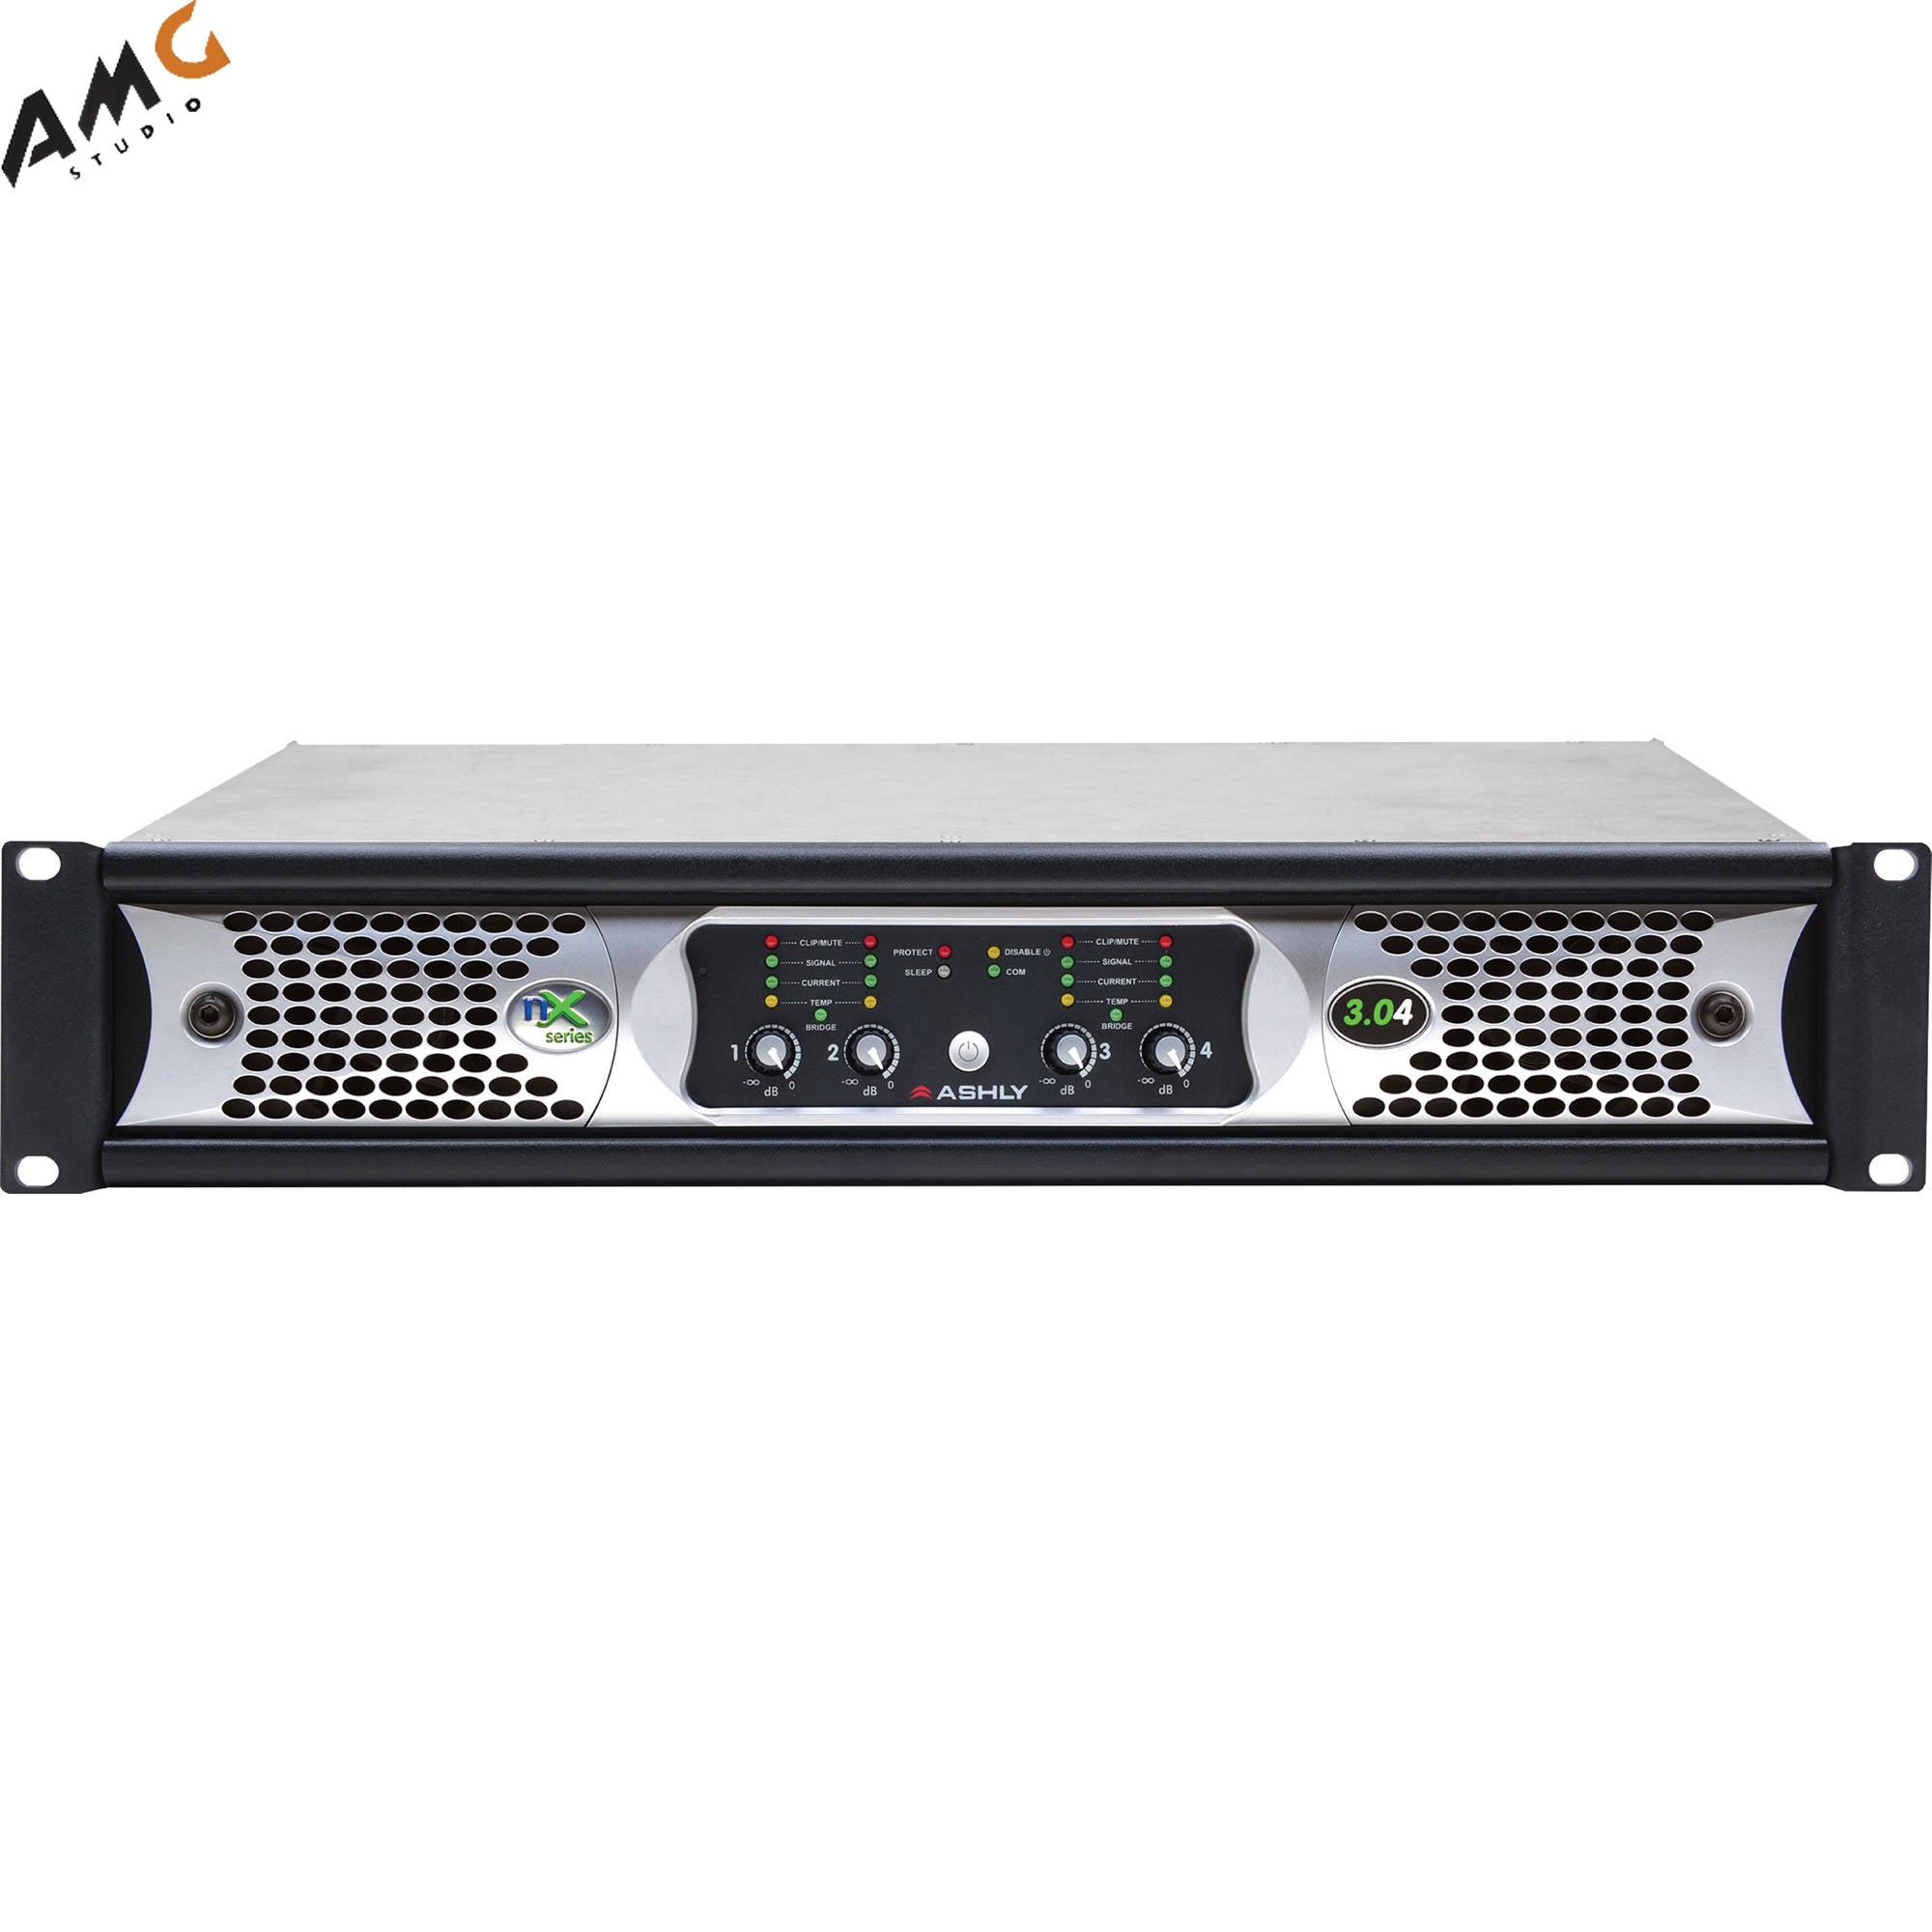 Ashly nX3.04 Power Amplifier 4 x 3000 Watts/2 Ohms with Programmable Outputs - Studio AMG